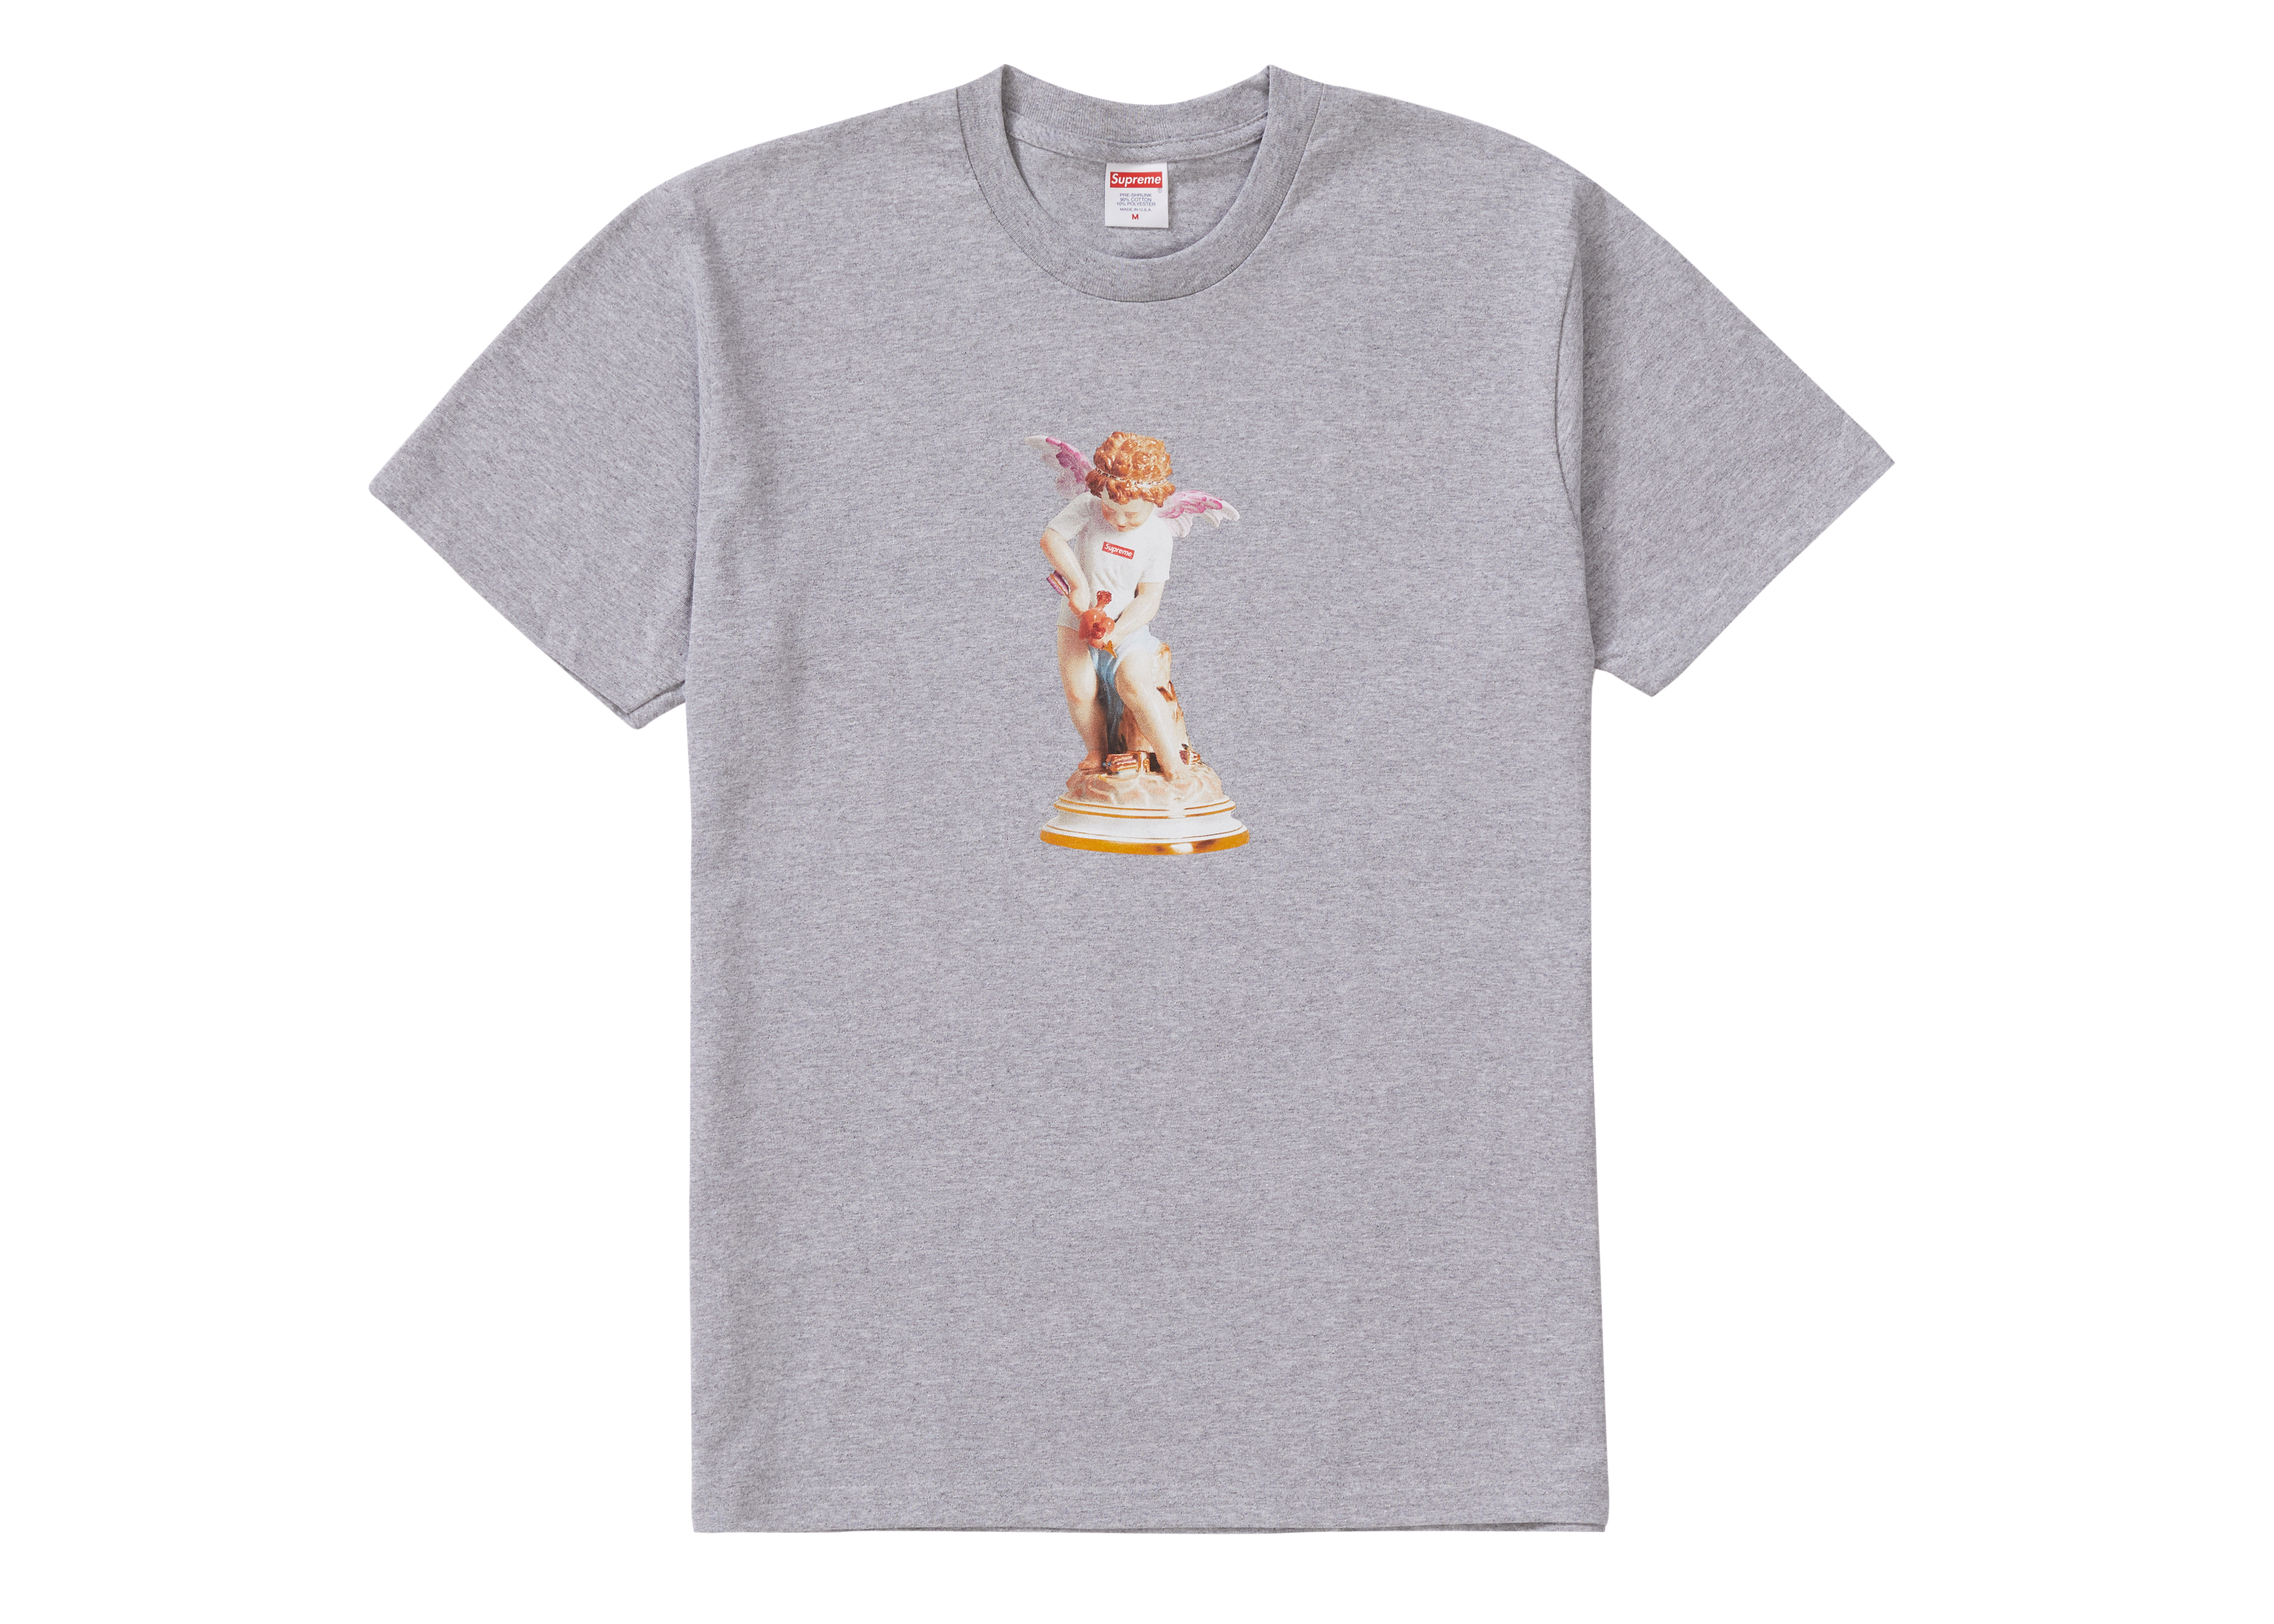 BRAND NEW DS Supreme Cupid Tee  *IN HAND* SS19 